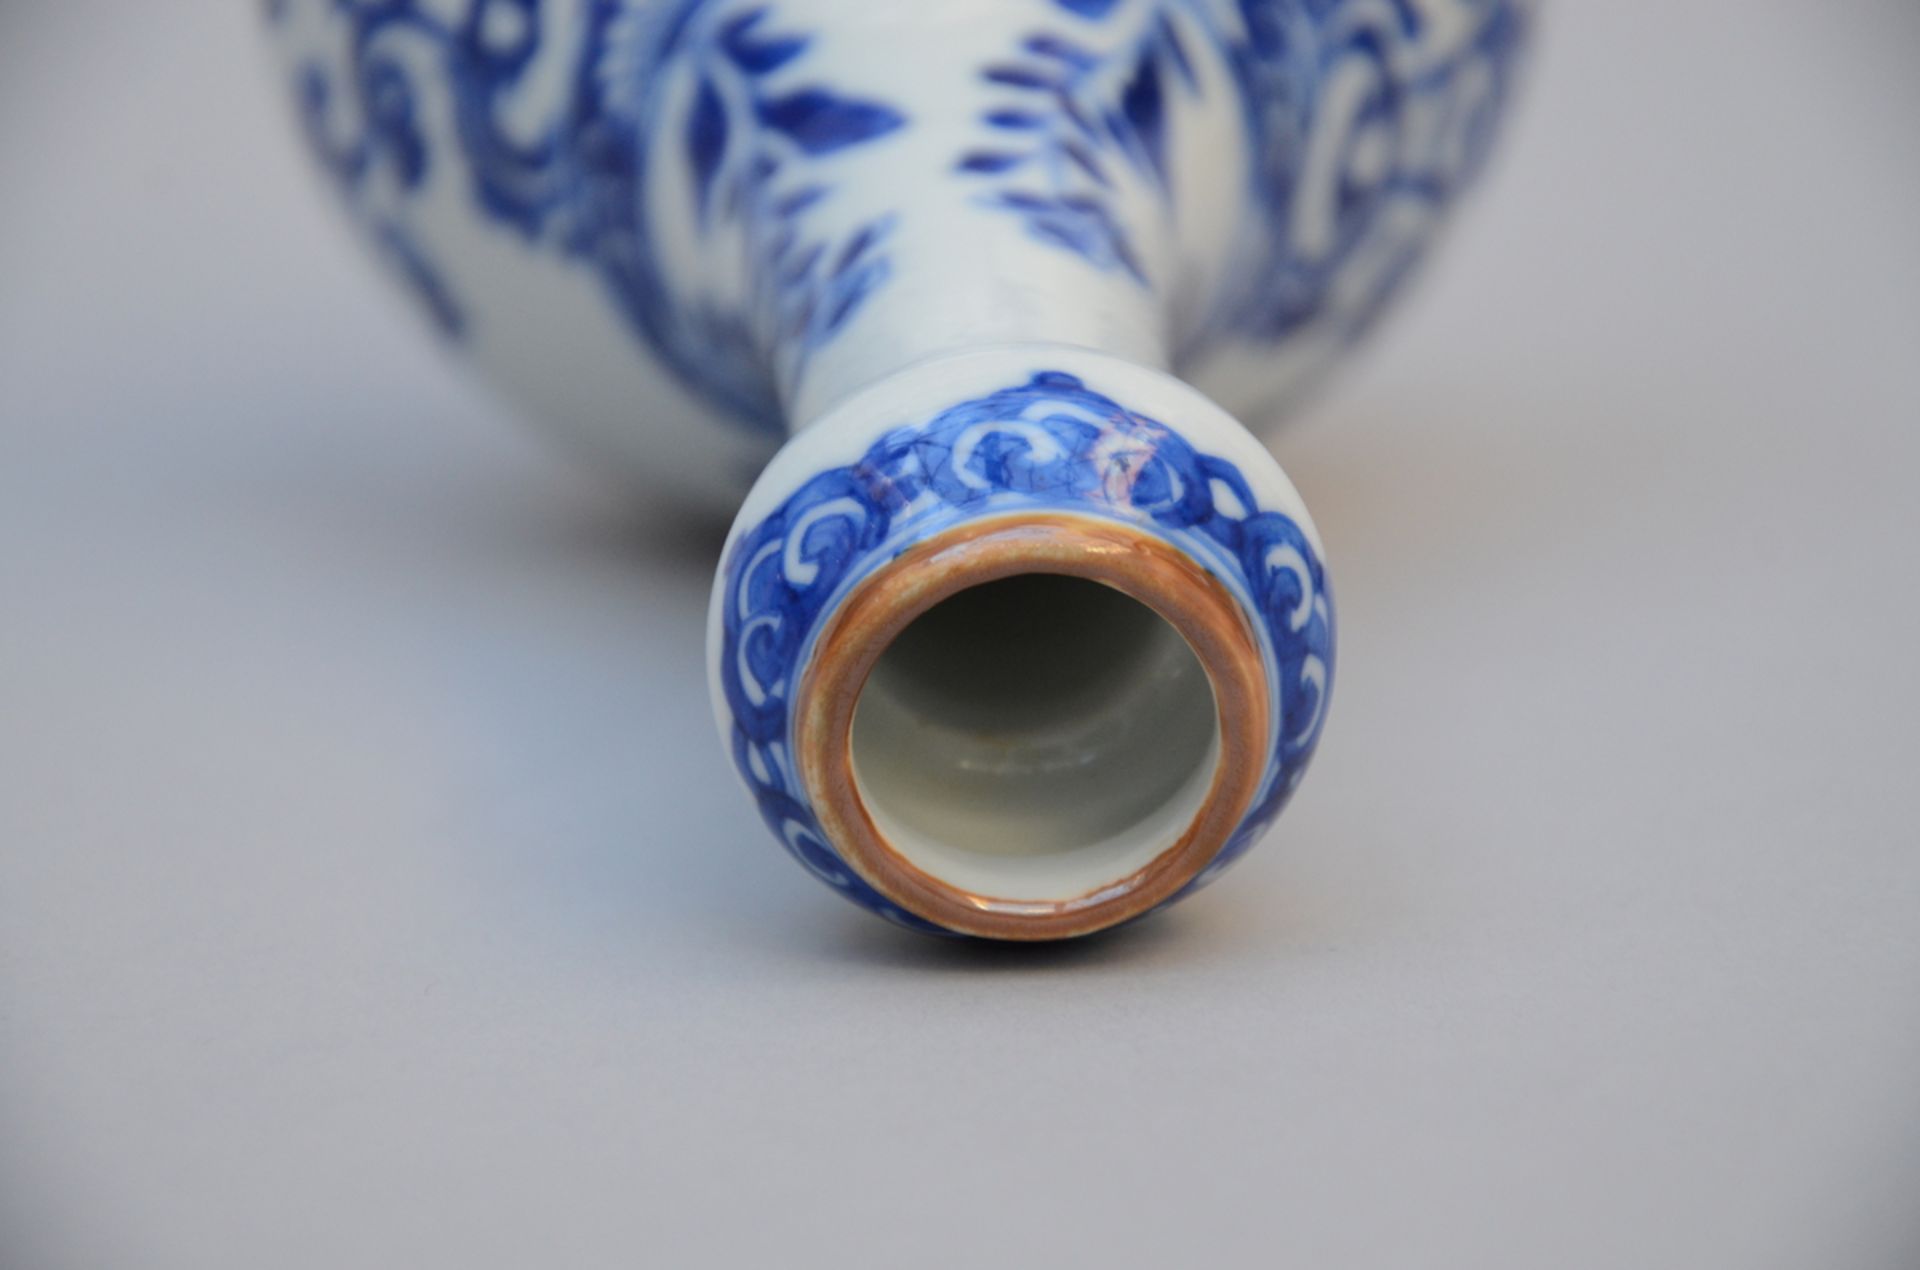 Garlic head vase in Chinese blue and white porcelain, Kangxi period (19 cm) - Image 2 of 3